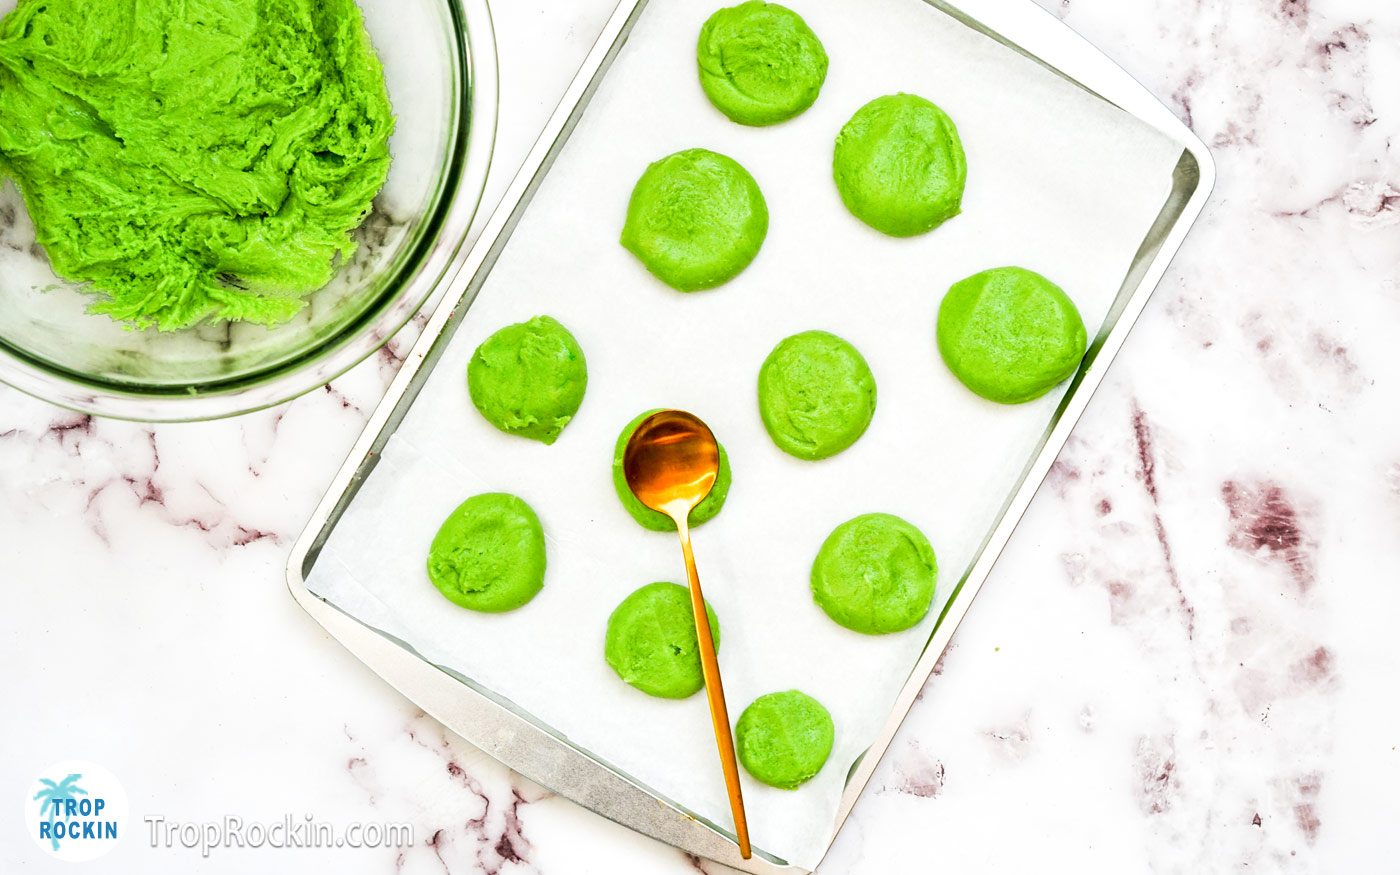 Green sugar cookie dough balls flattened slightly with a spoon on a baking sheet prepared with parchment paper.